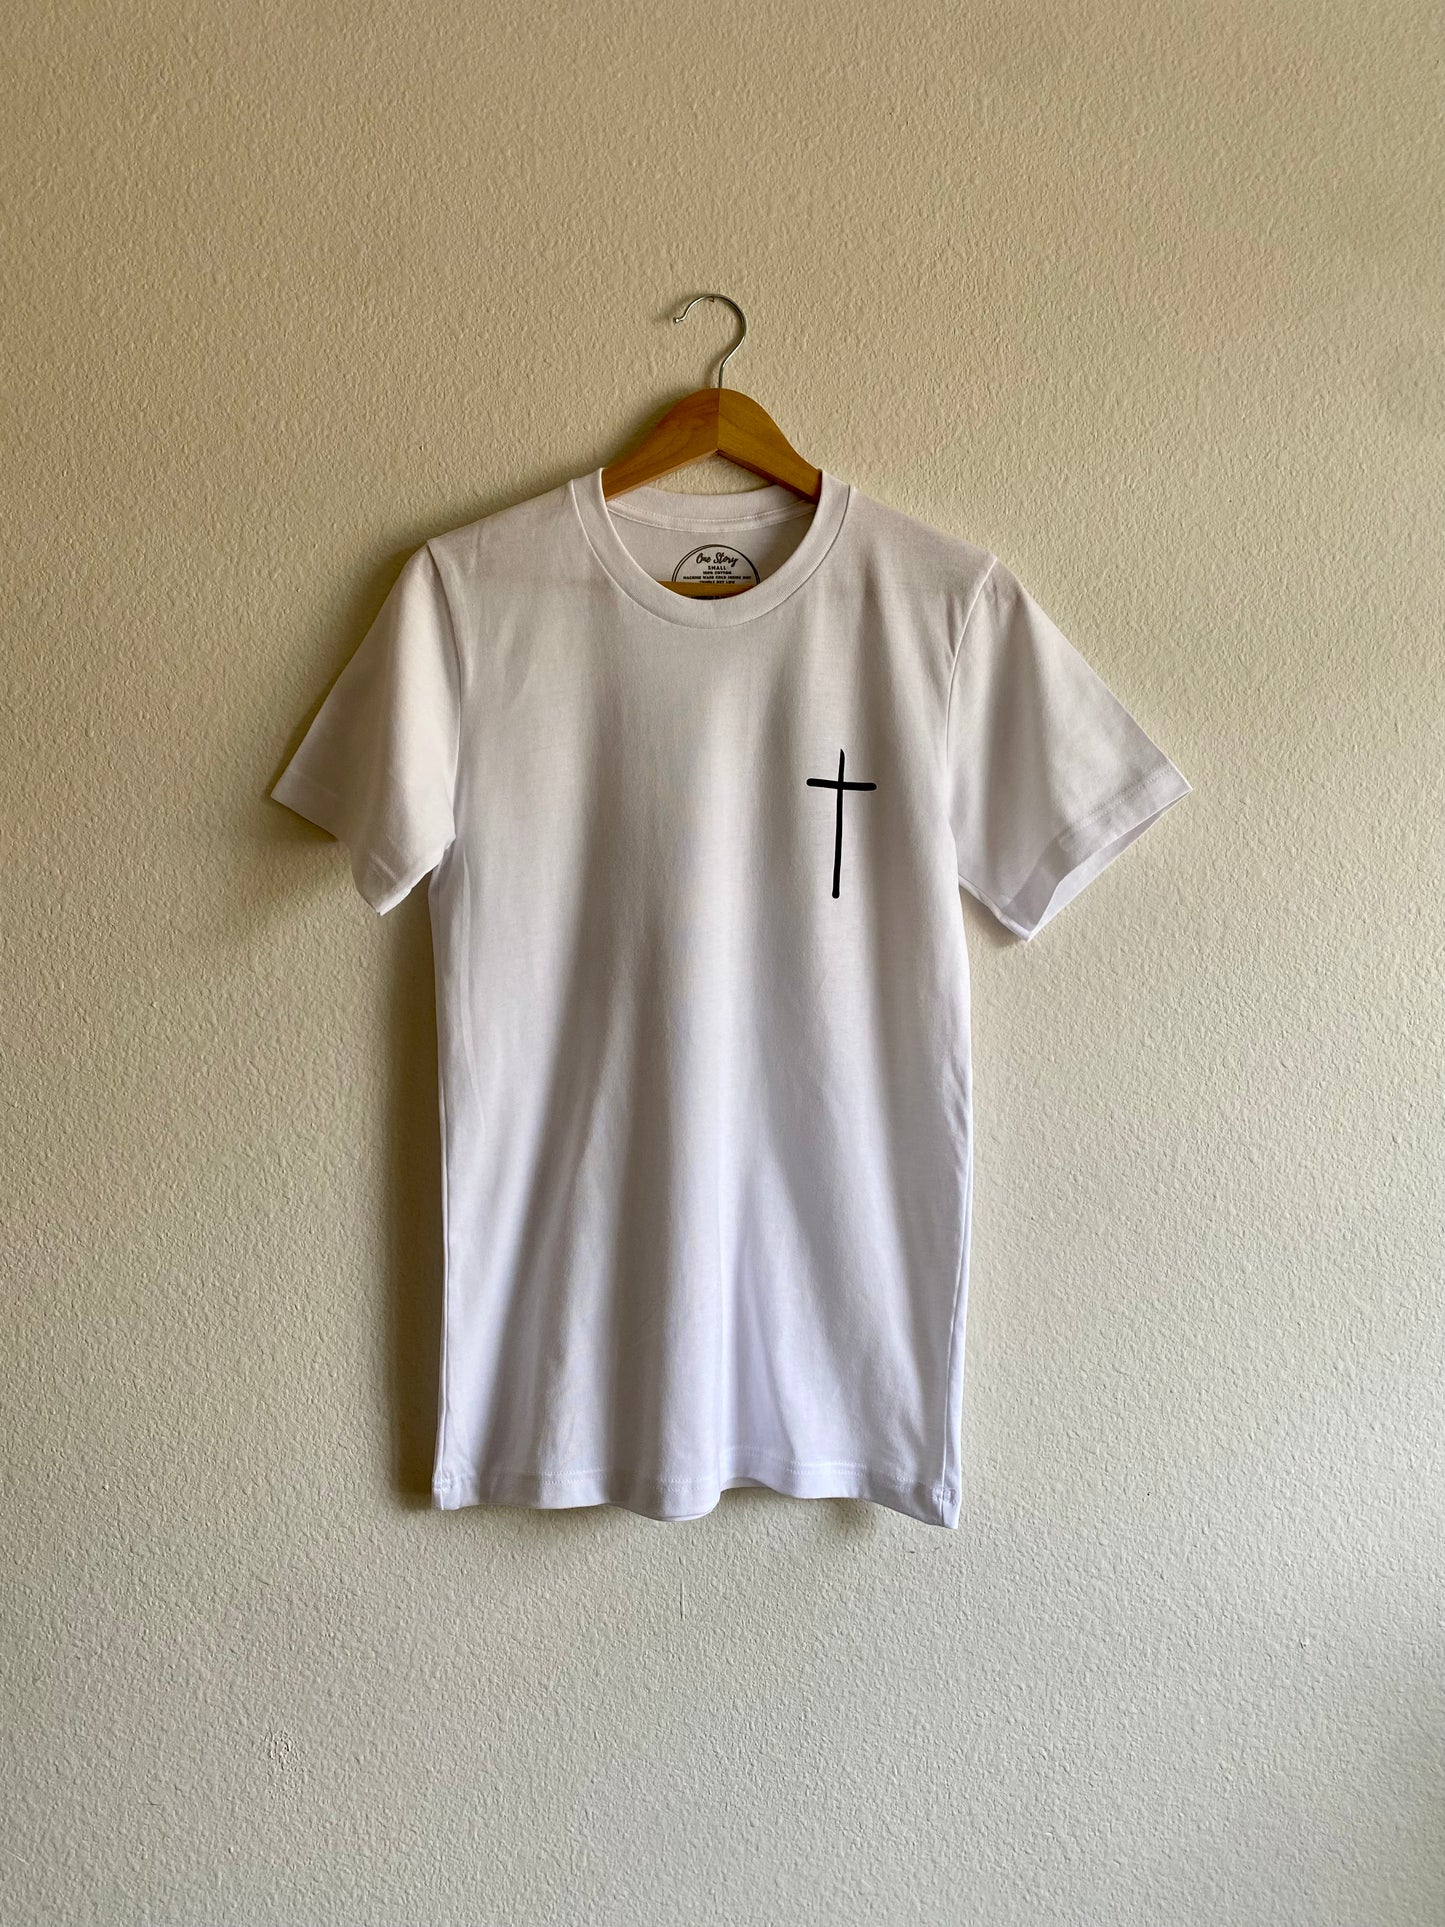 Jesus the Only Way Tee